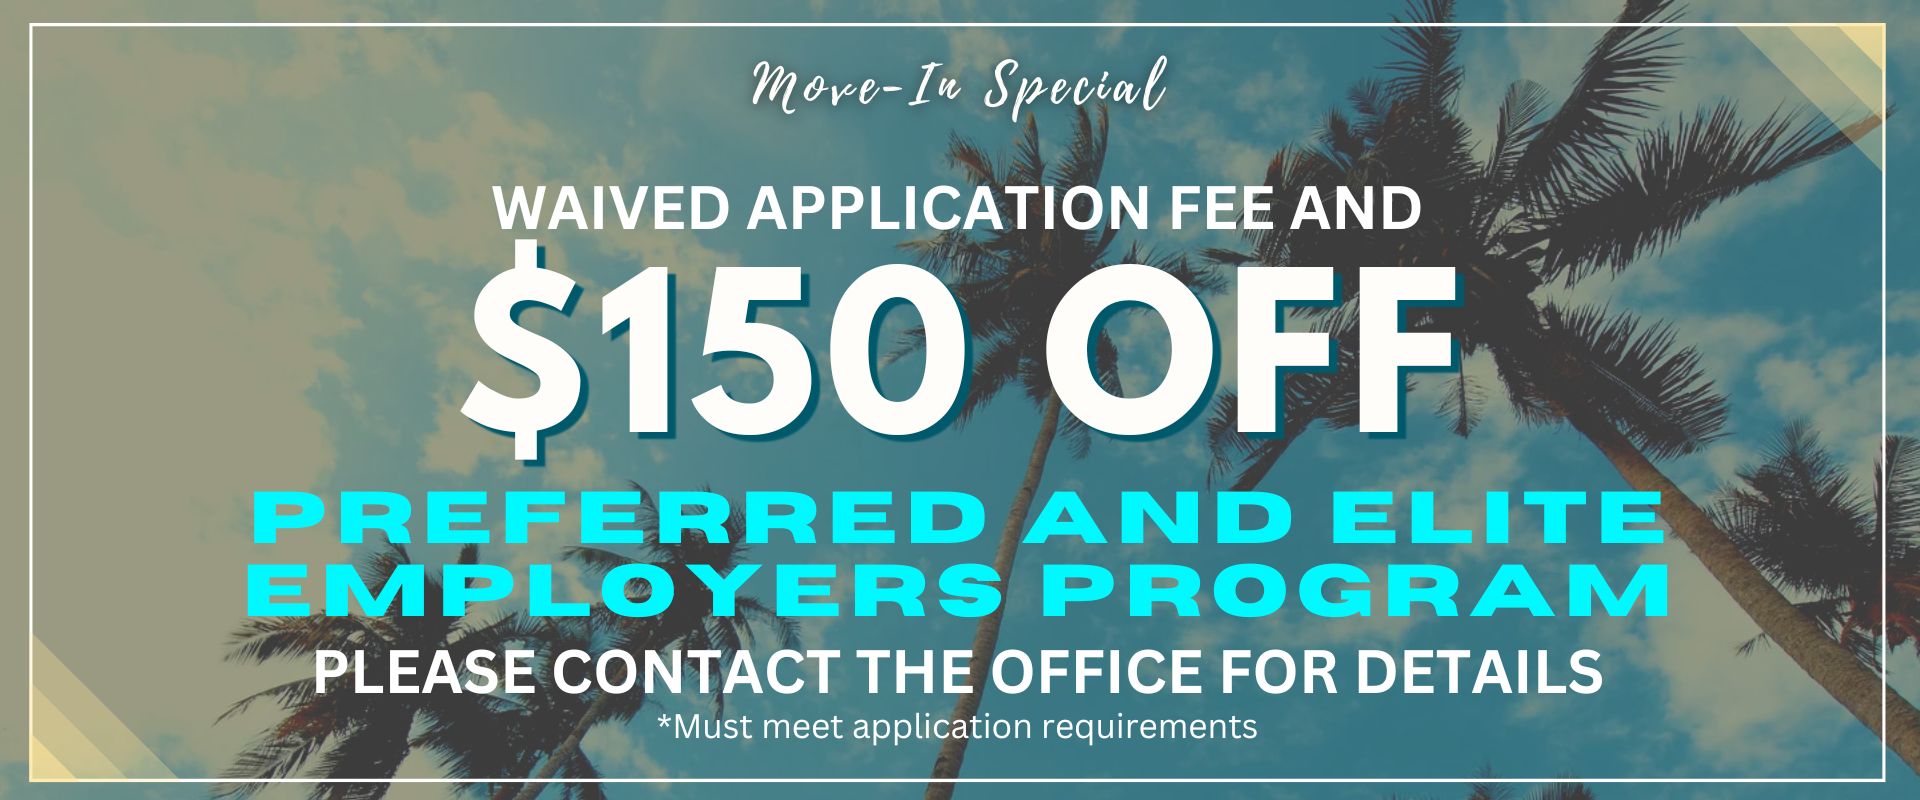 Move-In Special - Waived Application Fee and $150.00 Off Preferred and Elite Employer Program Please contact office for details *Must meet application requirements